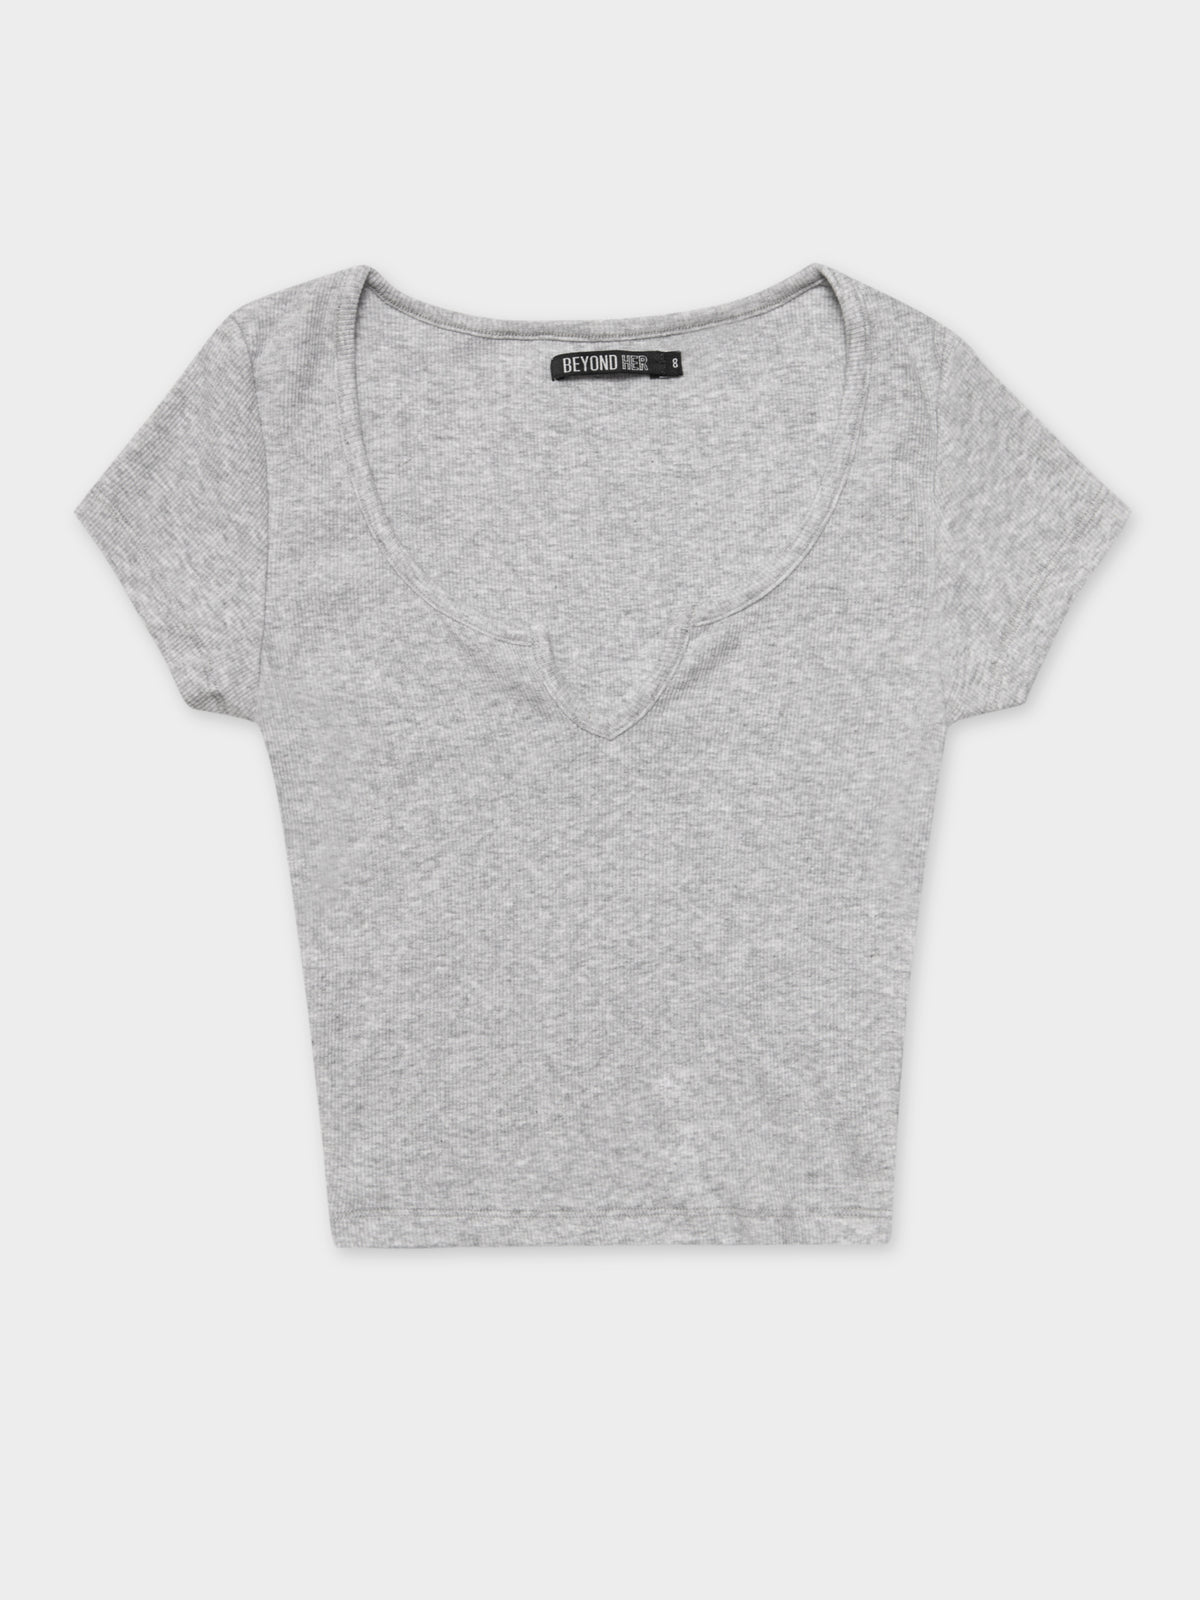 Bowie Cut Out T-Shirt in Grey Marl